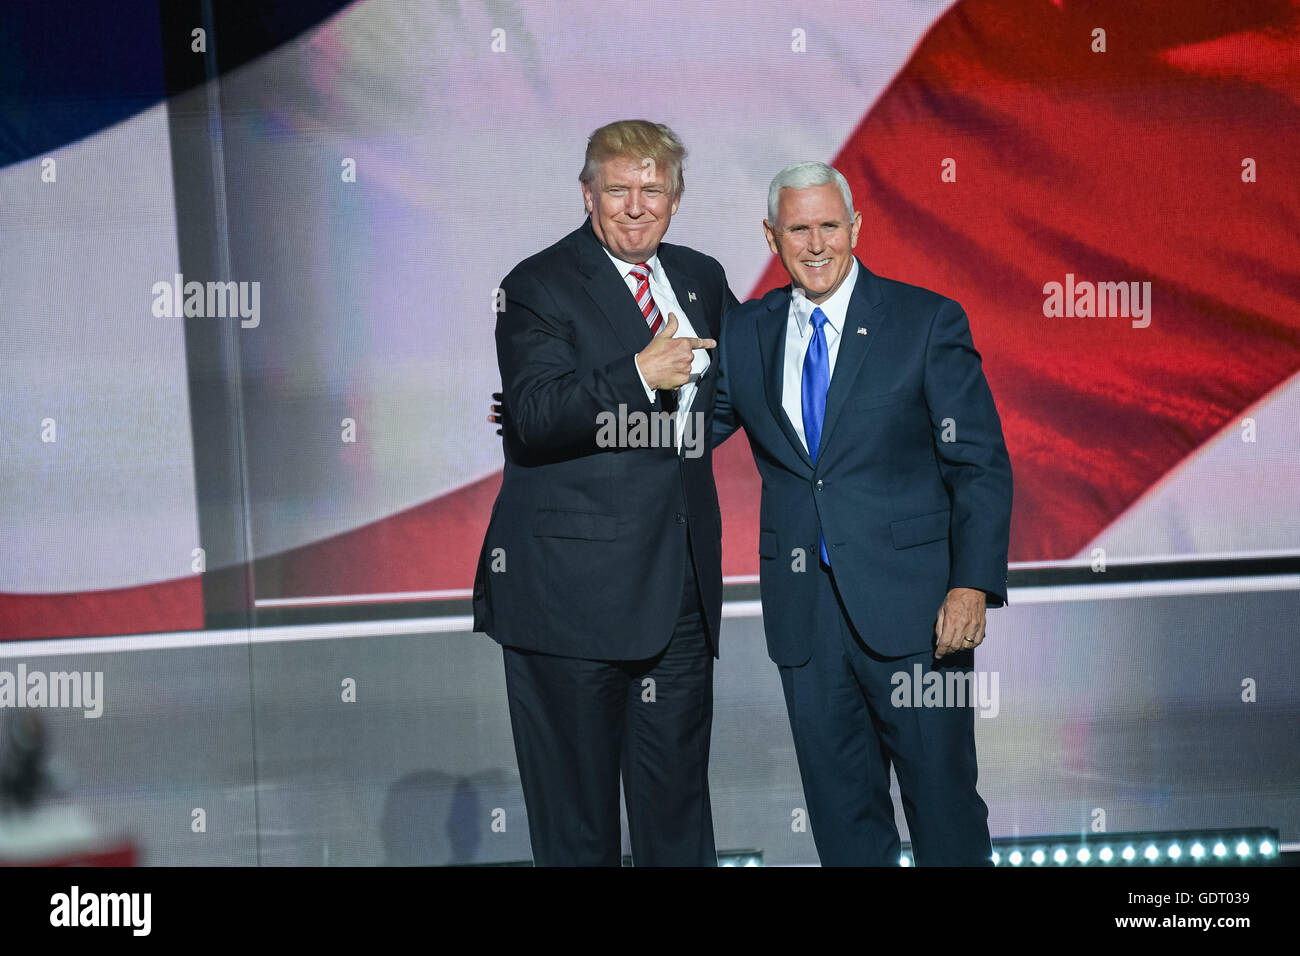 Cleveland, United States. 20th July, 2016. GOP Presidential nominee Donald Trump congratulates his running mate Gov. Mike Pence after Pence formally accepted the nomination during the third day of the Republican National Convention July 20, 2016 in Cleveland, Ohio. Credit:  Planetpix/Alamy Live News Stock Photo